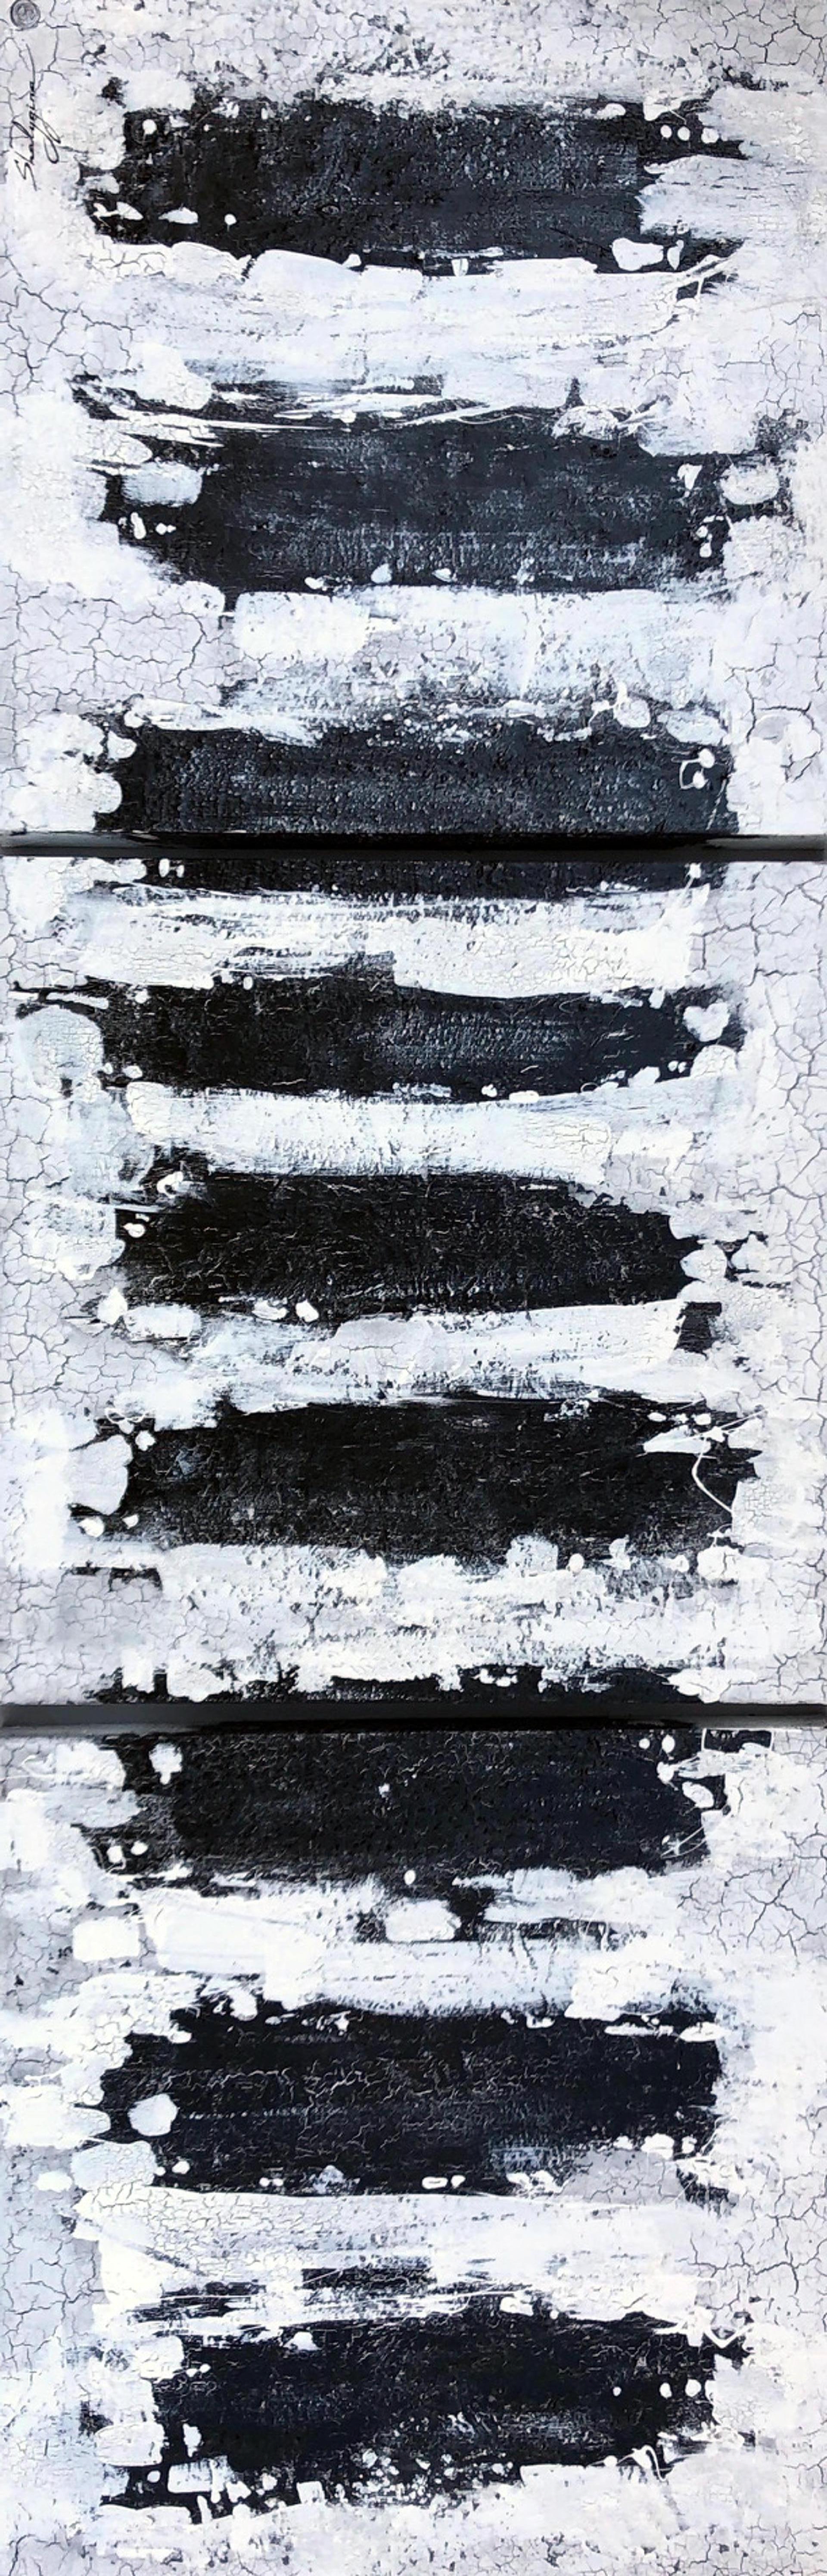 Geometric Black White Contemporary Textured Abstract Painting Triptych 30"x90"